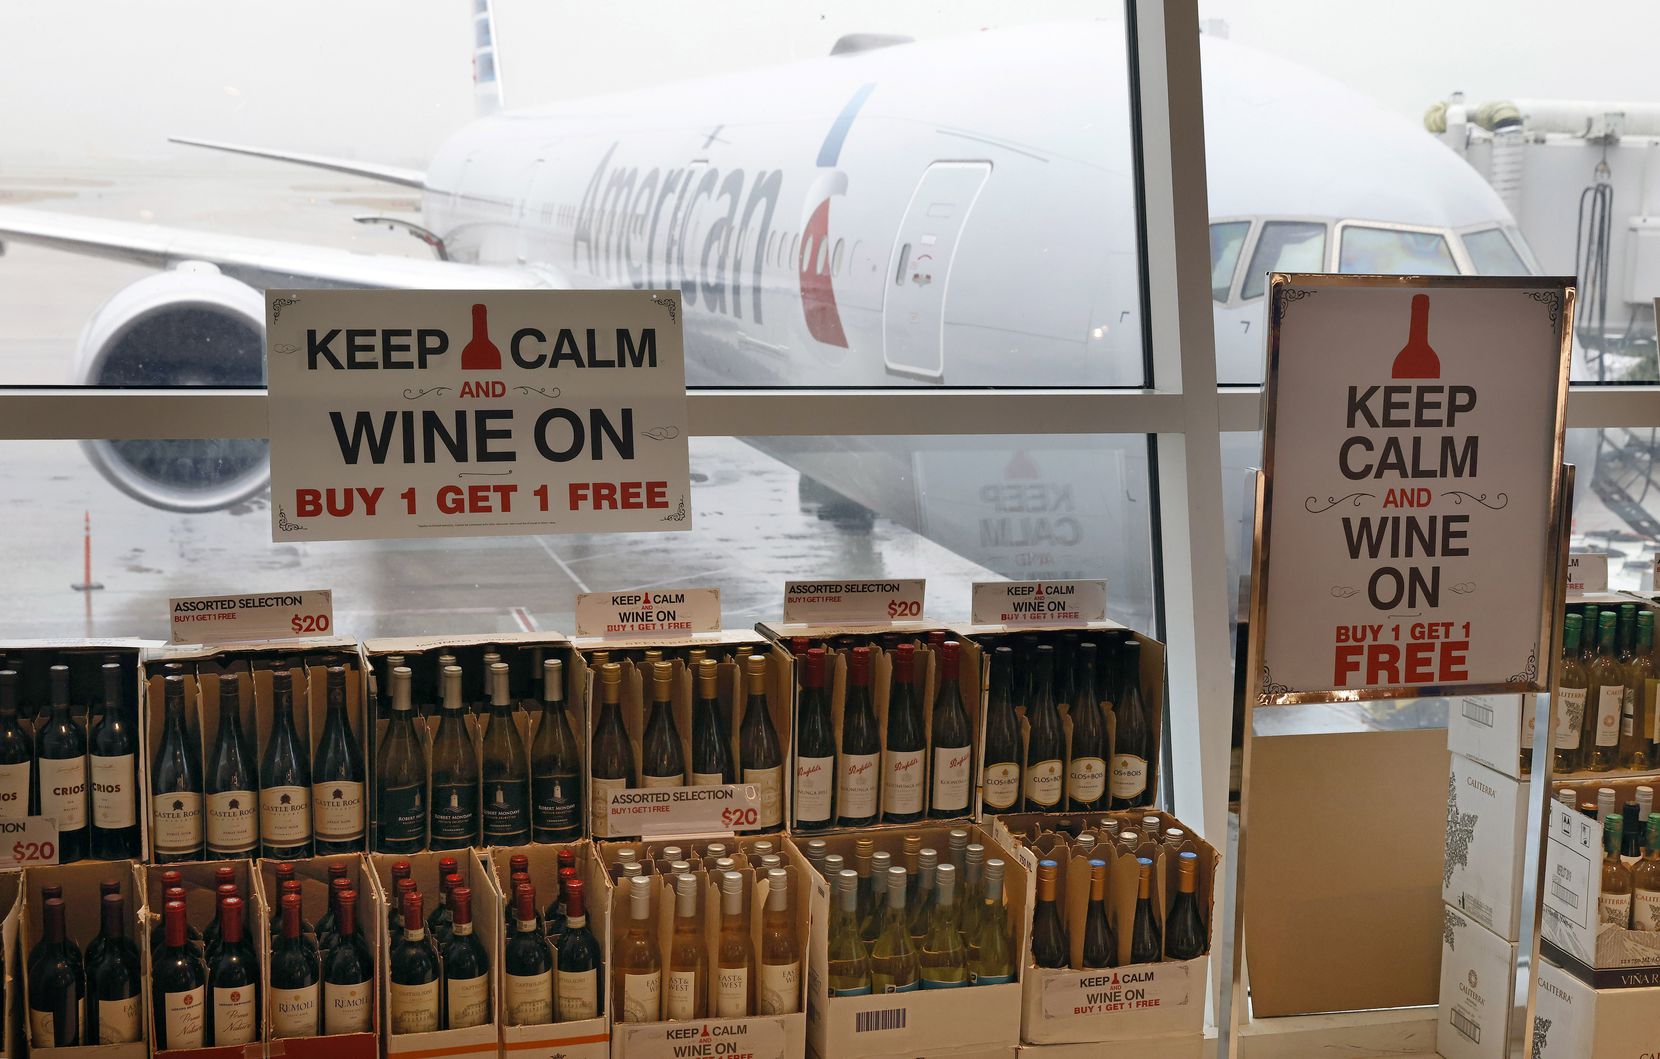 Boxes of wine are buy one, get one free at the TRG Duty Free shop in Terminal D.